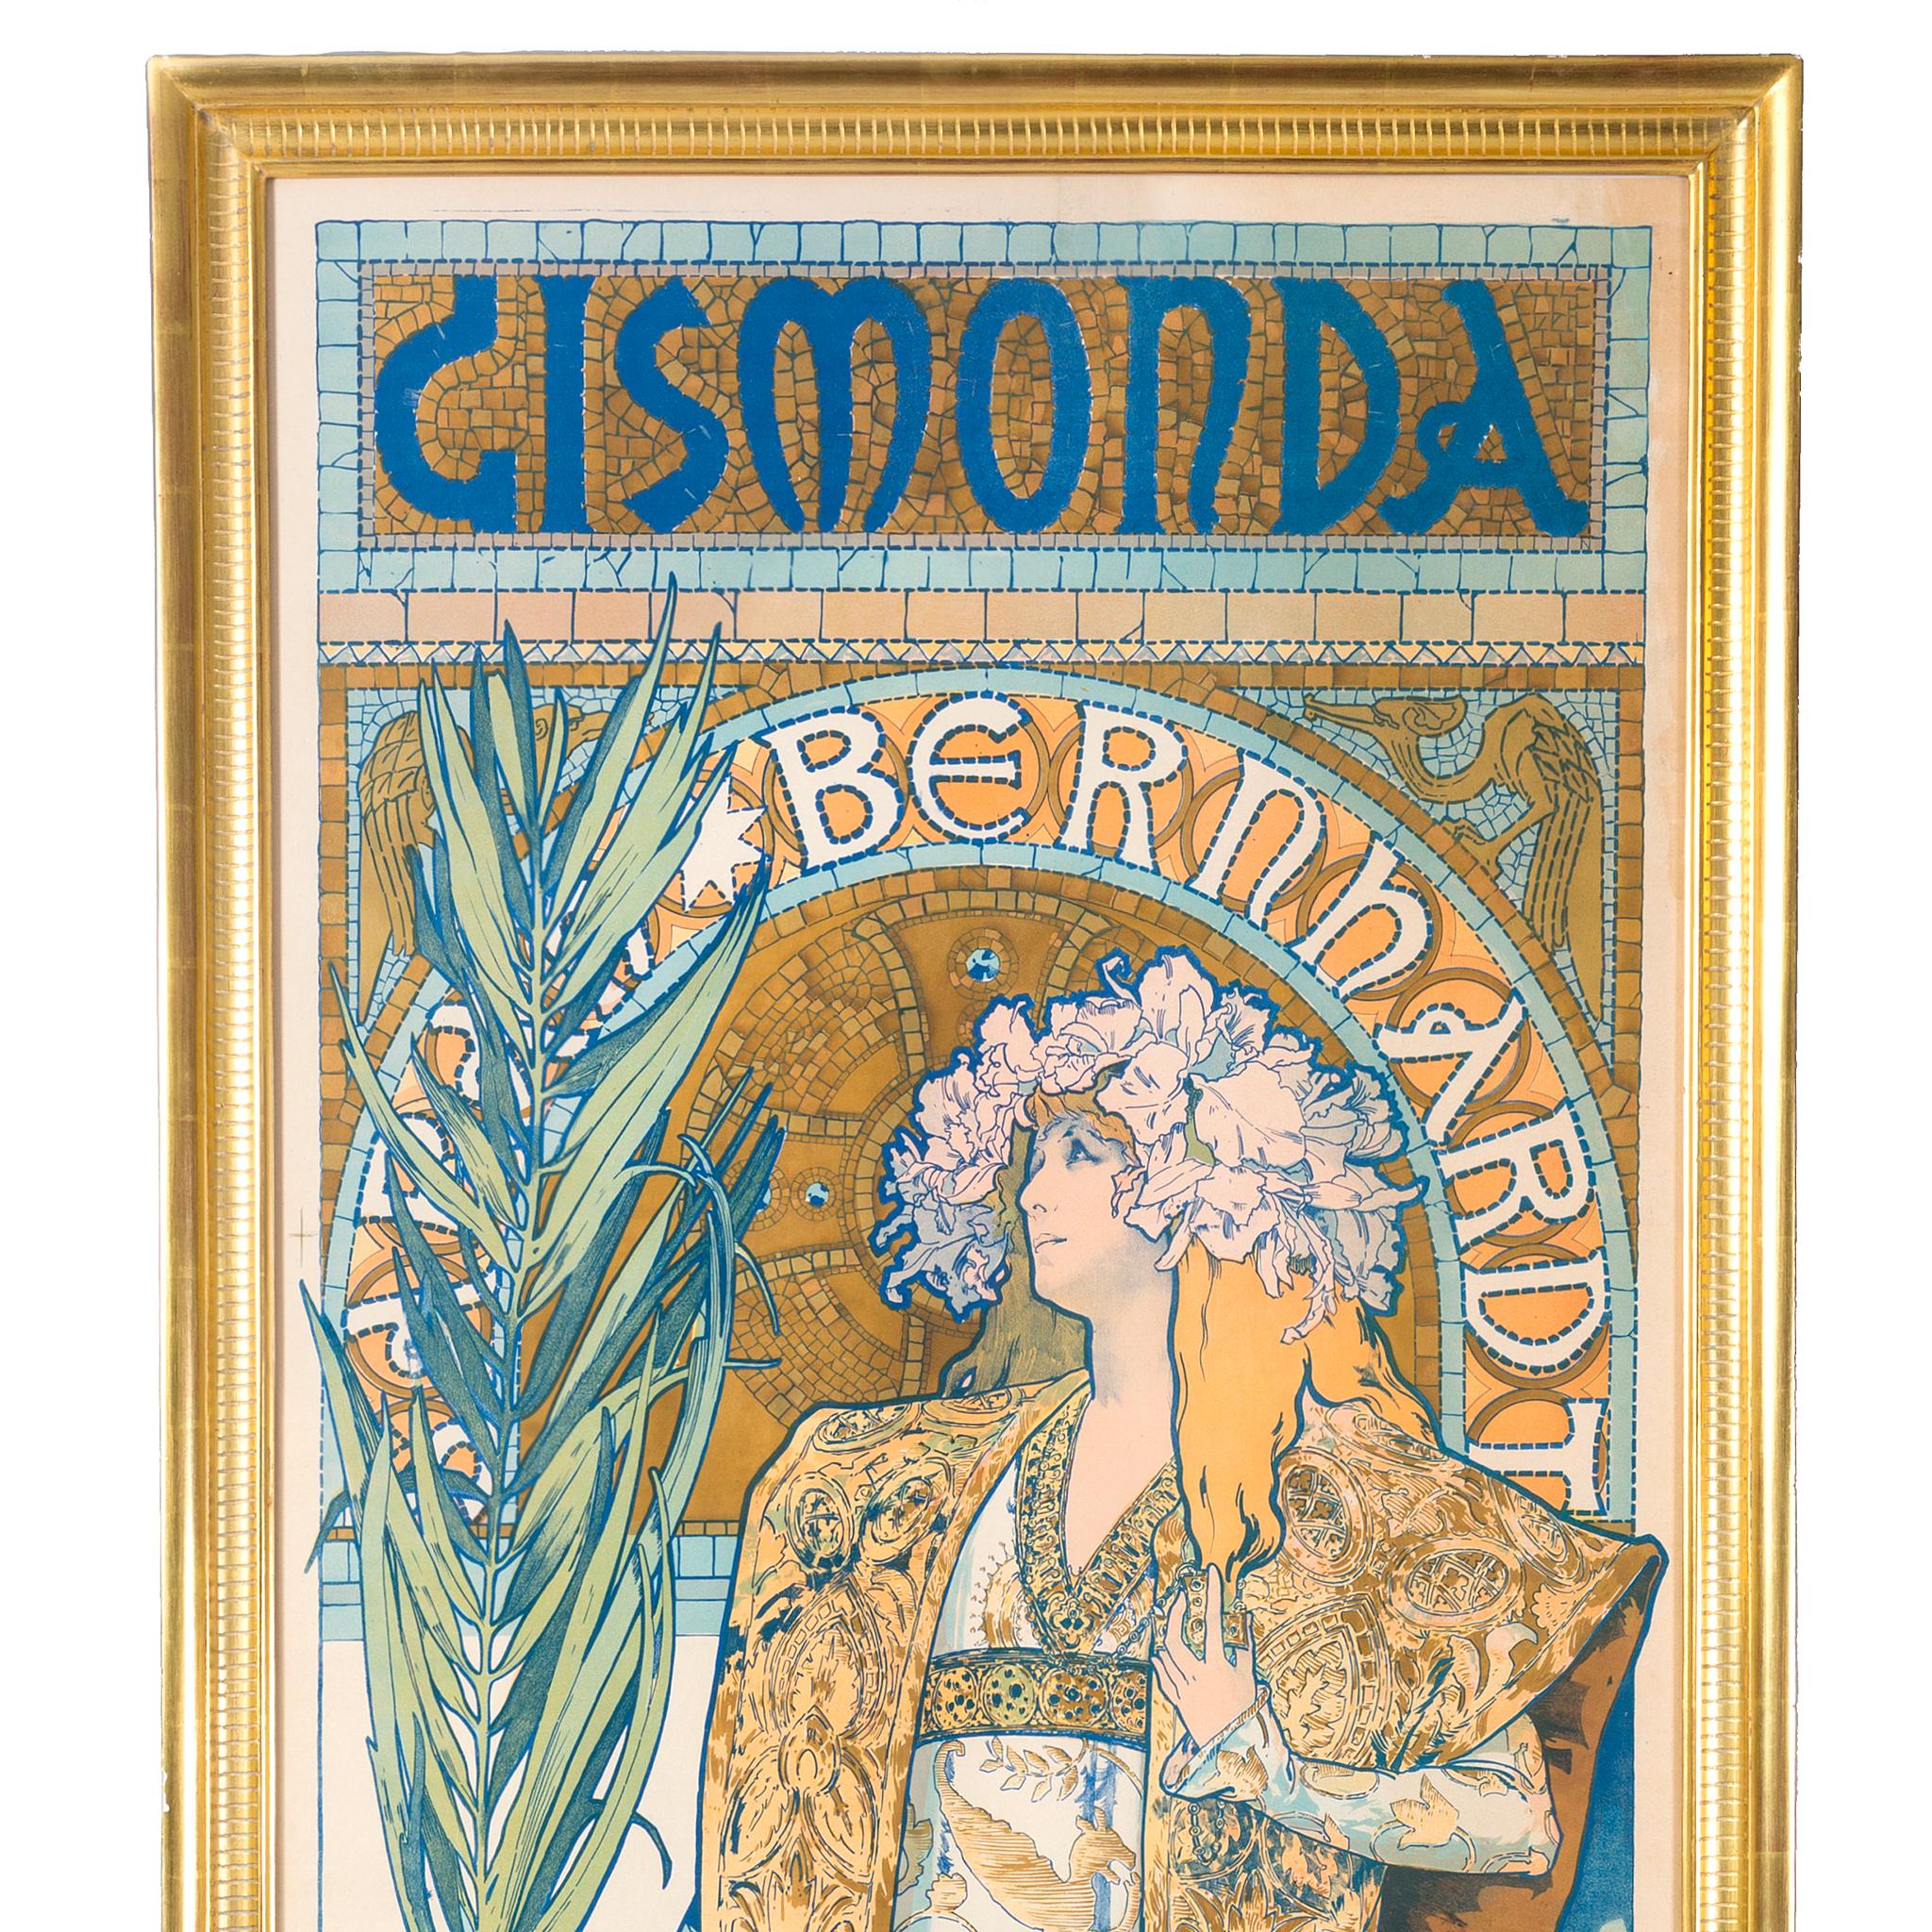 Alphonse Mucha’s first and perhaps most famous poster, this iconic 